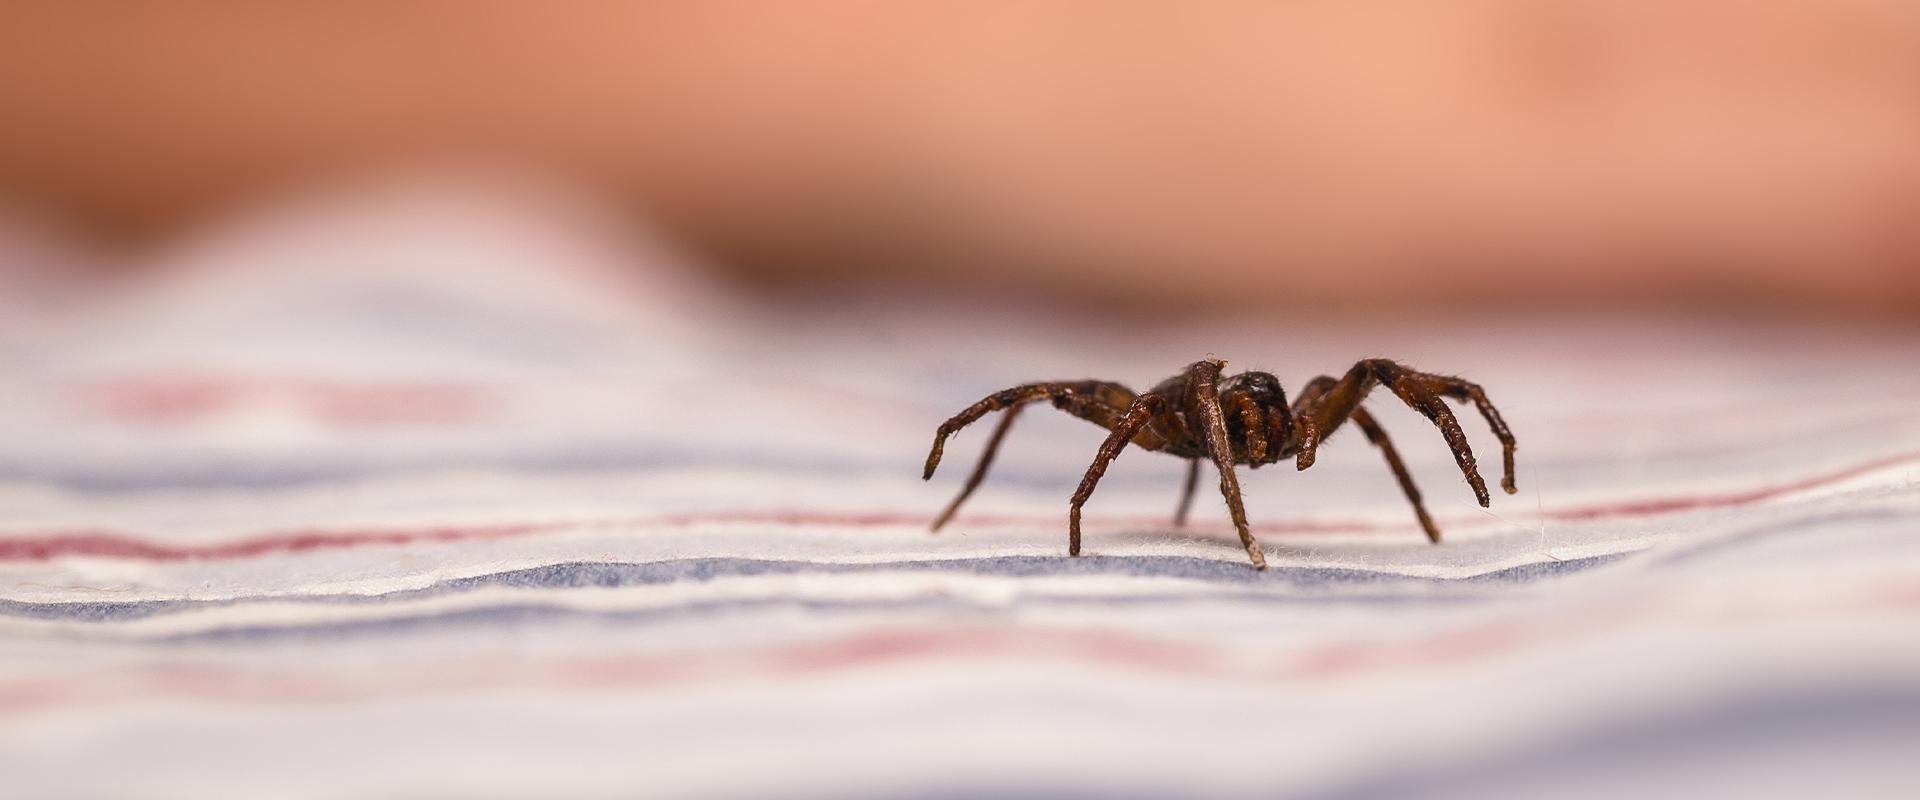 a spider crawling on a bed sheet